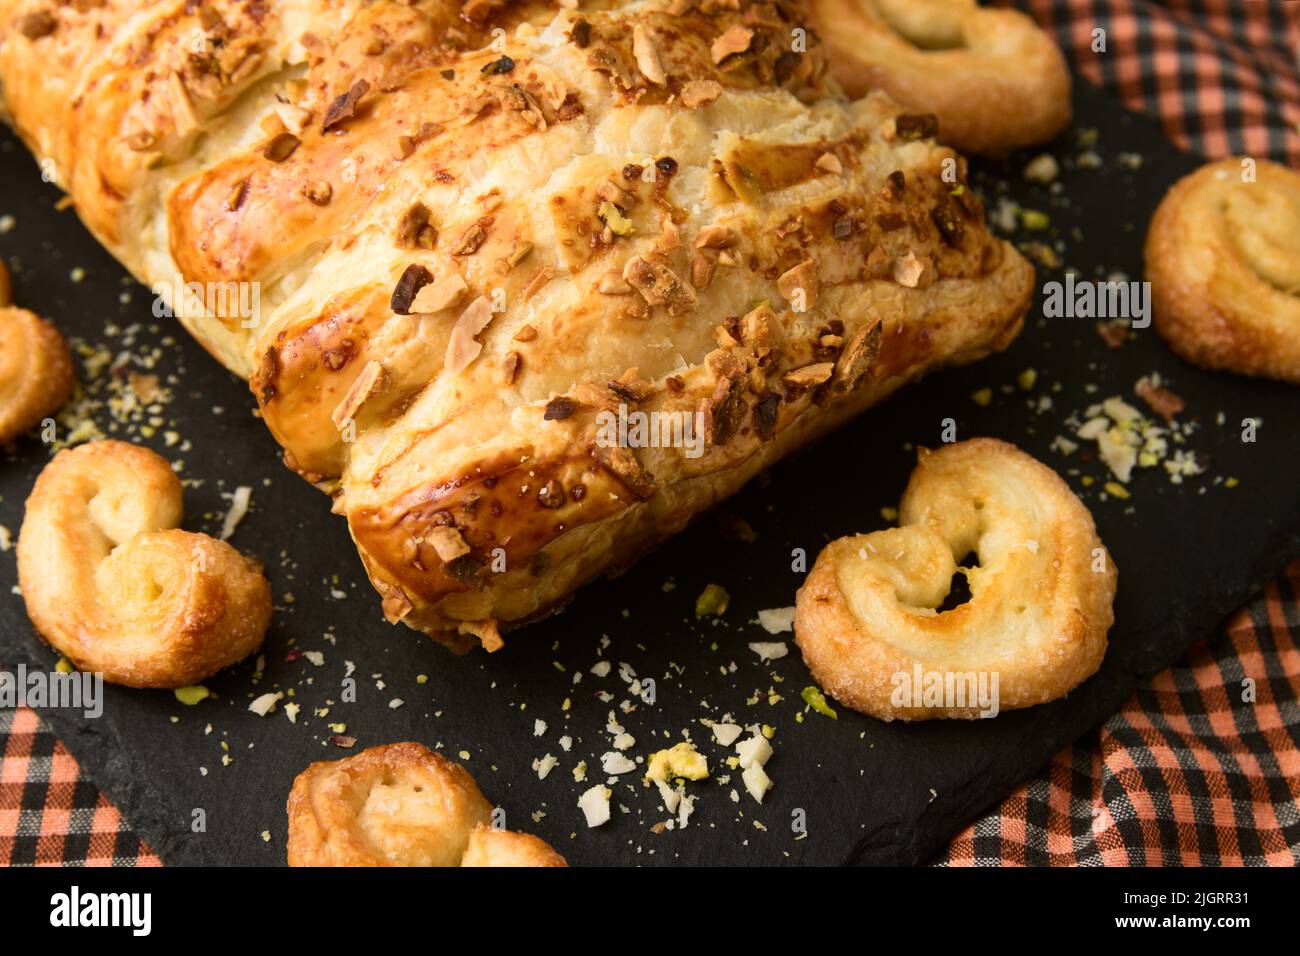 Image of a puff pastry filled with chocolate or cocoa cream next to artisan puff pastry palm trees, all on a black slate plate Stock Photo